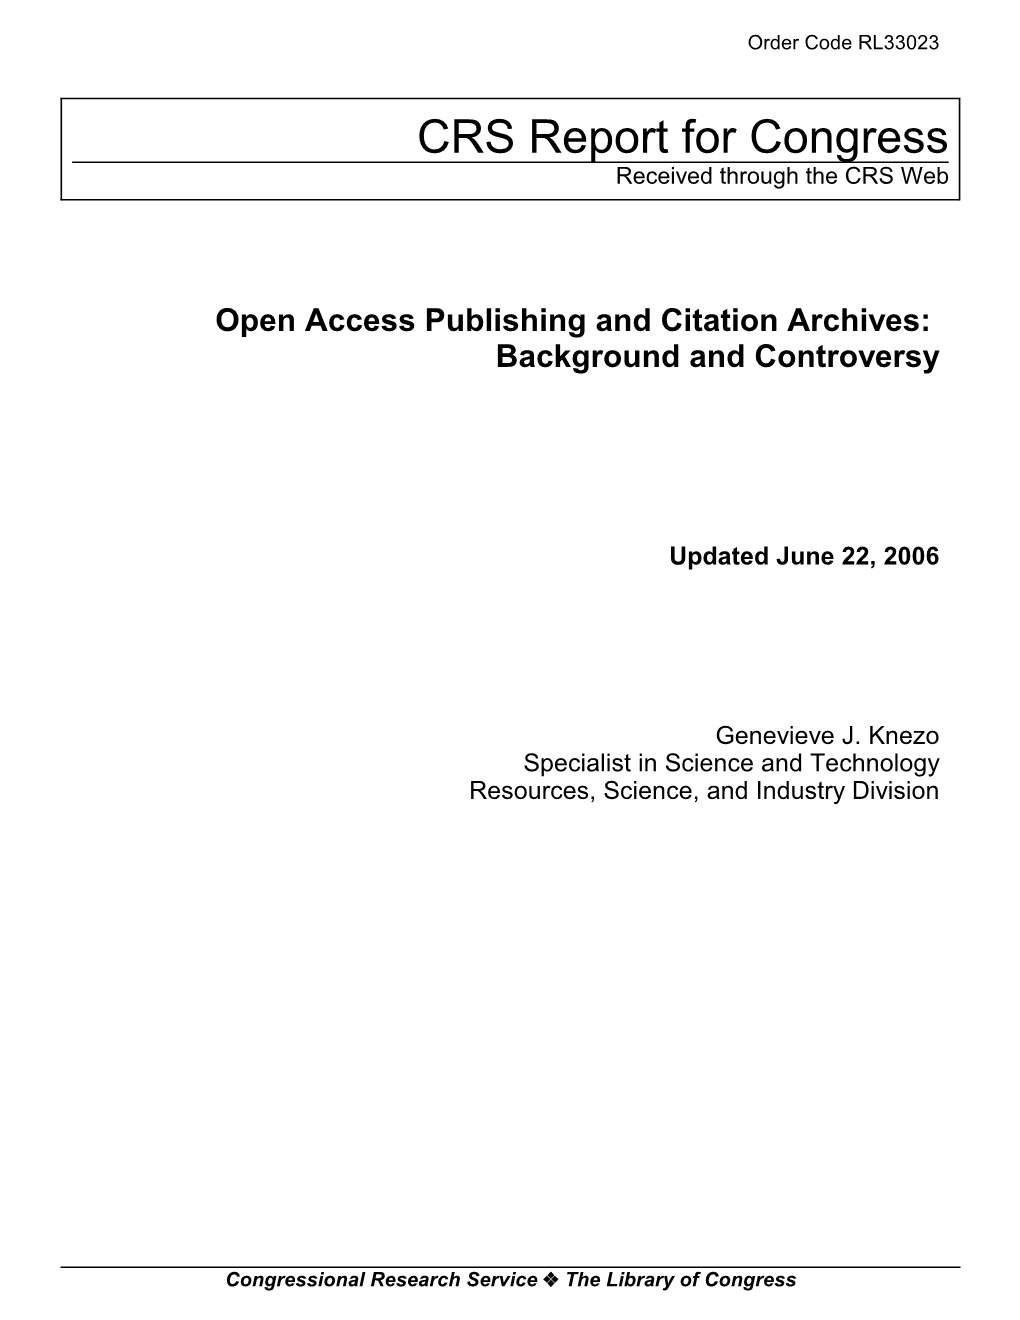 Open Access Publishing and Citation Archives: Background and Controversy